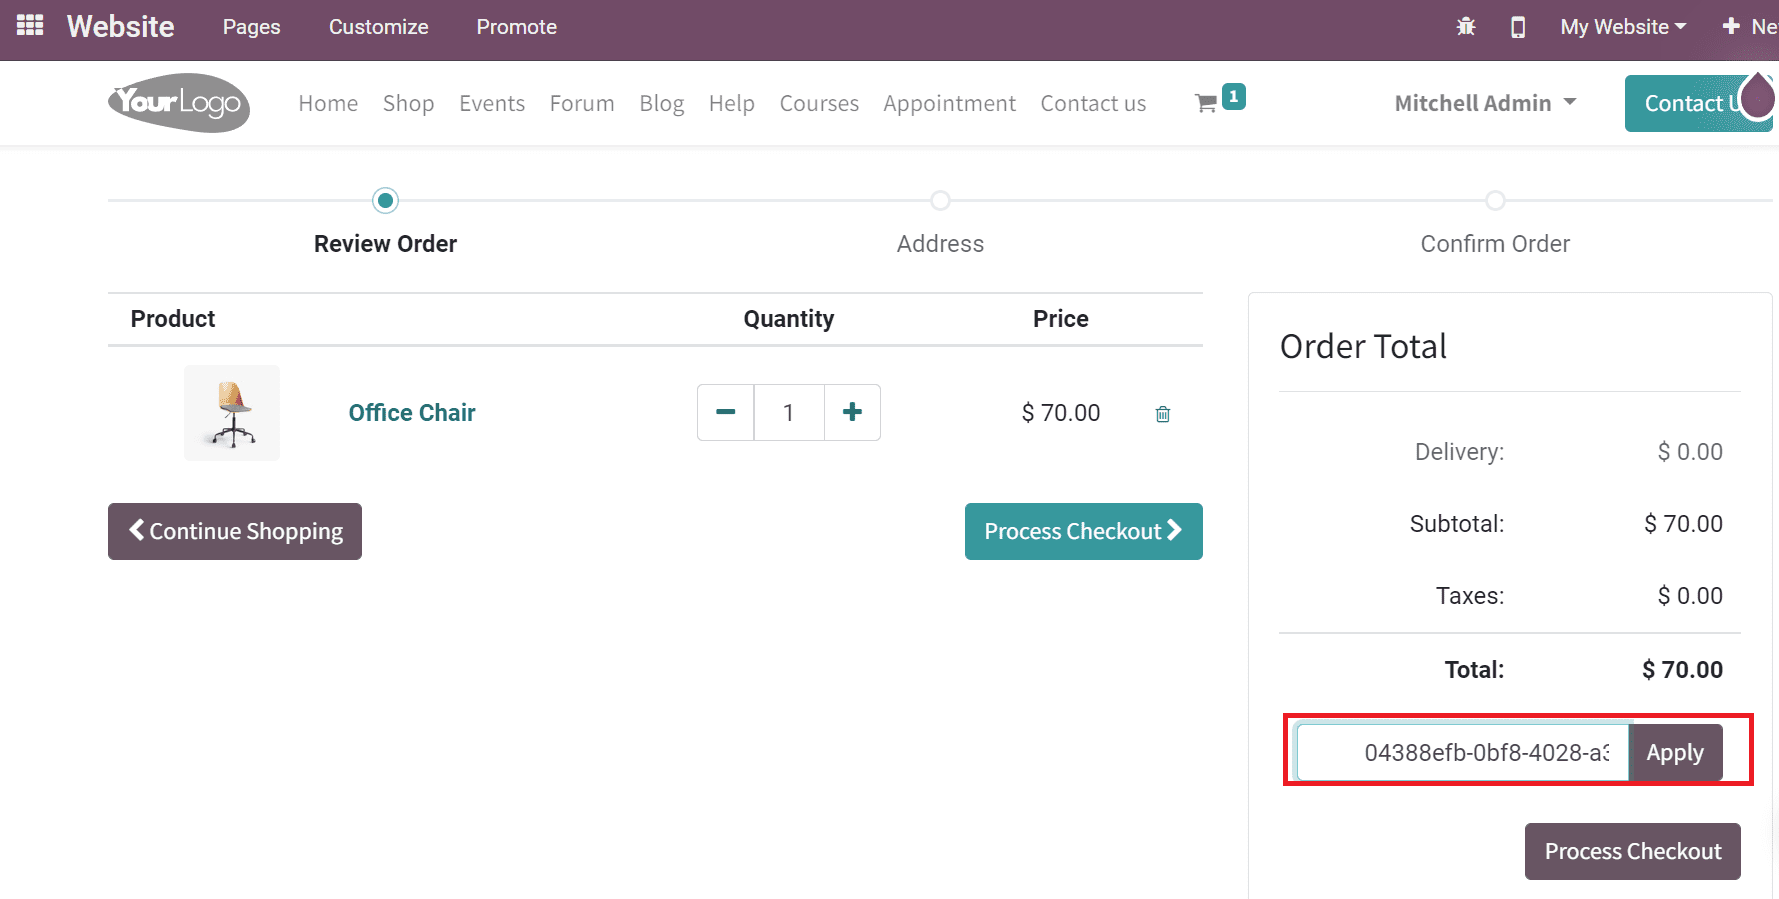 how-to-set-up-coupon-programs-with-the-odoo-15-sales-cybrosys